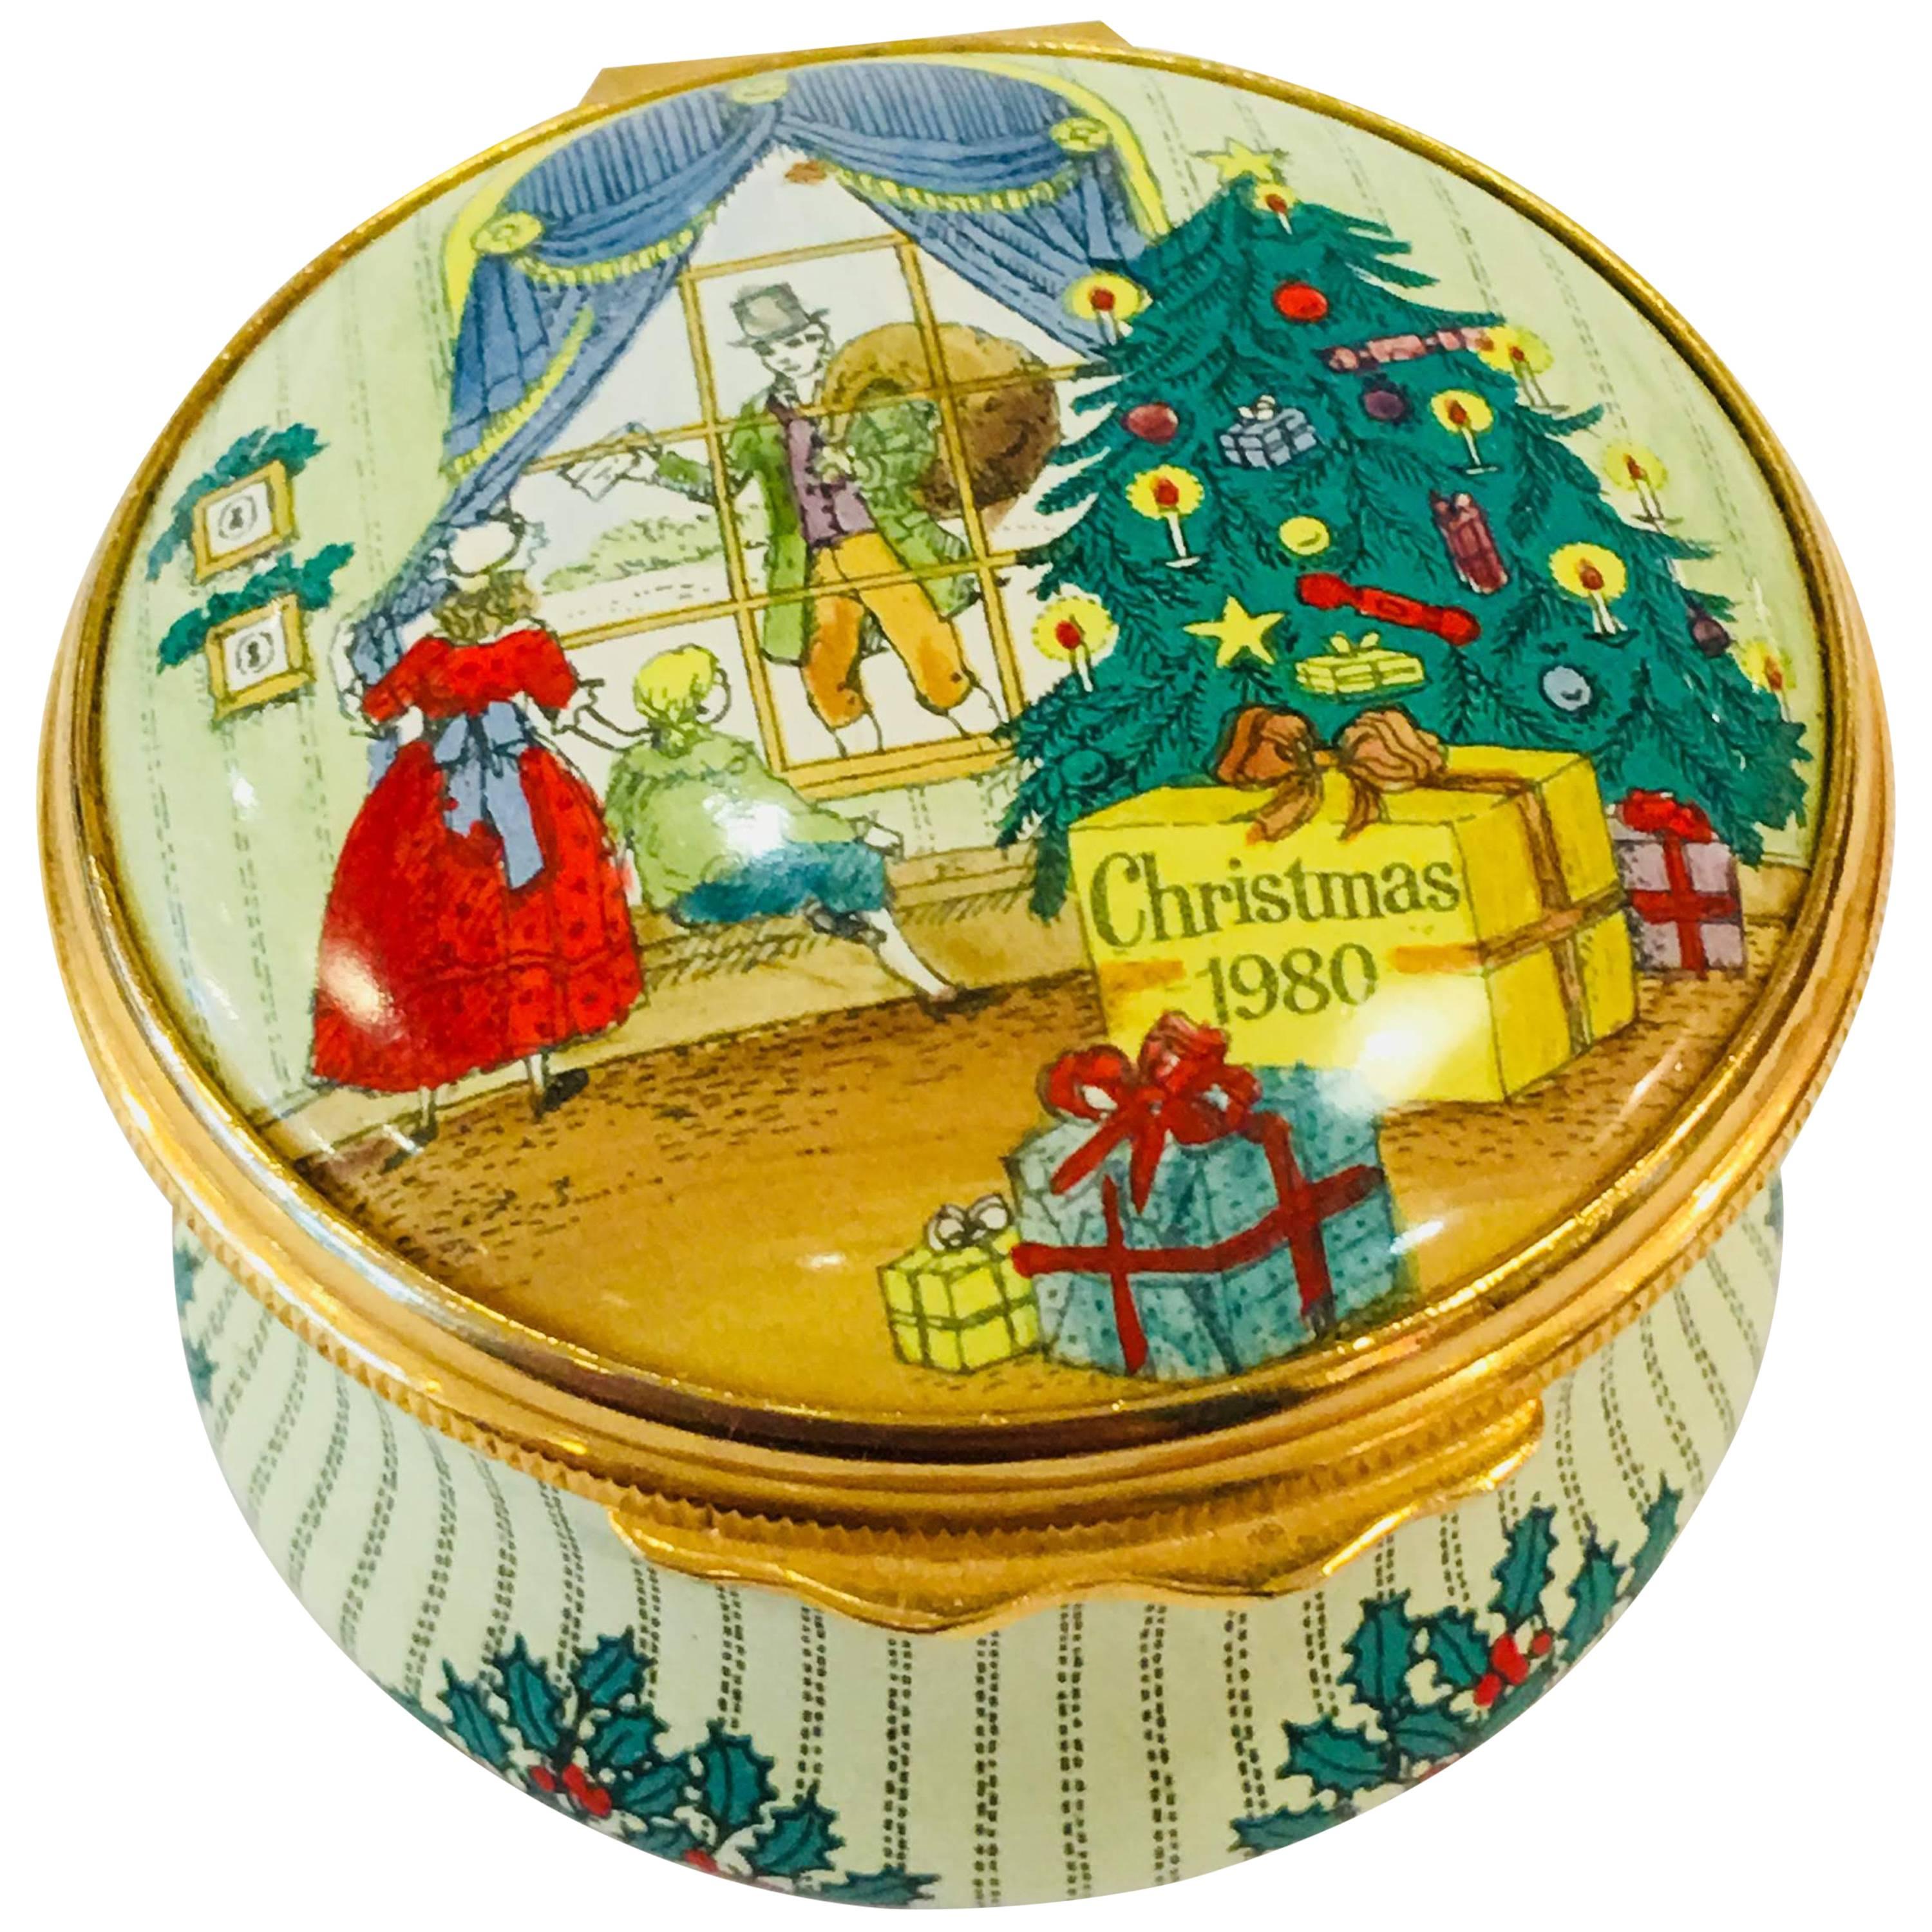 Purchased New In Halcyon Days Shoppe Original Owner London 1980 In Original Box Retired Oval Halcyon Days Vintage Roses Enamel Box Ca